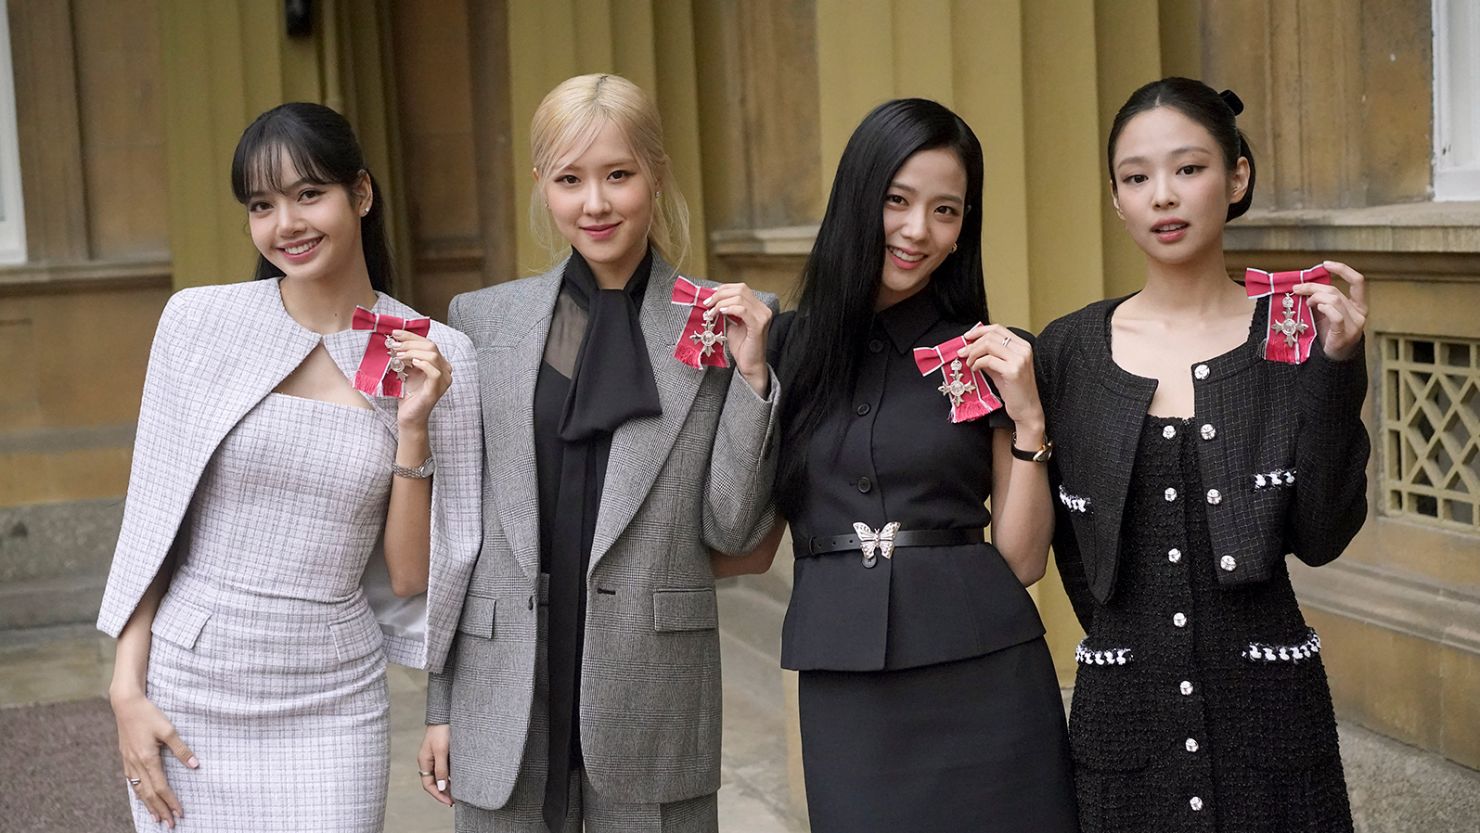 From left, Lisa (Lalisa Manoban), Rose (Roseanne Park), Jisoo Kim and Jennie Kim, from the K-Pop band Blackpink pose with their Honorary MBEs, Members of the Order of the British Empire, awarded to them in recognition of the band's role as COP26 advocates for the COP26 Summit in Glasgow 2021, in London, Wednesday, November 22, 2023.